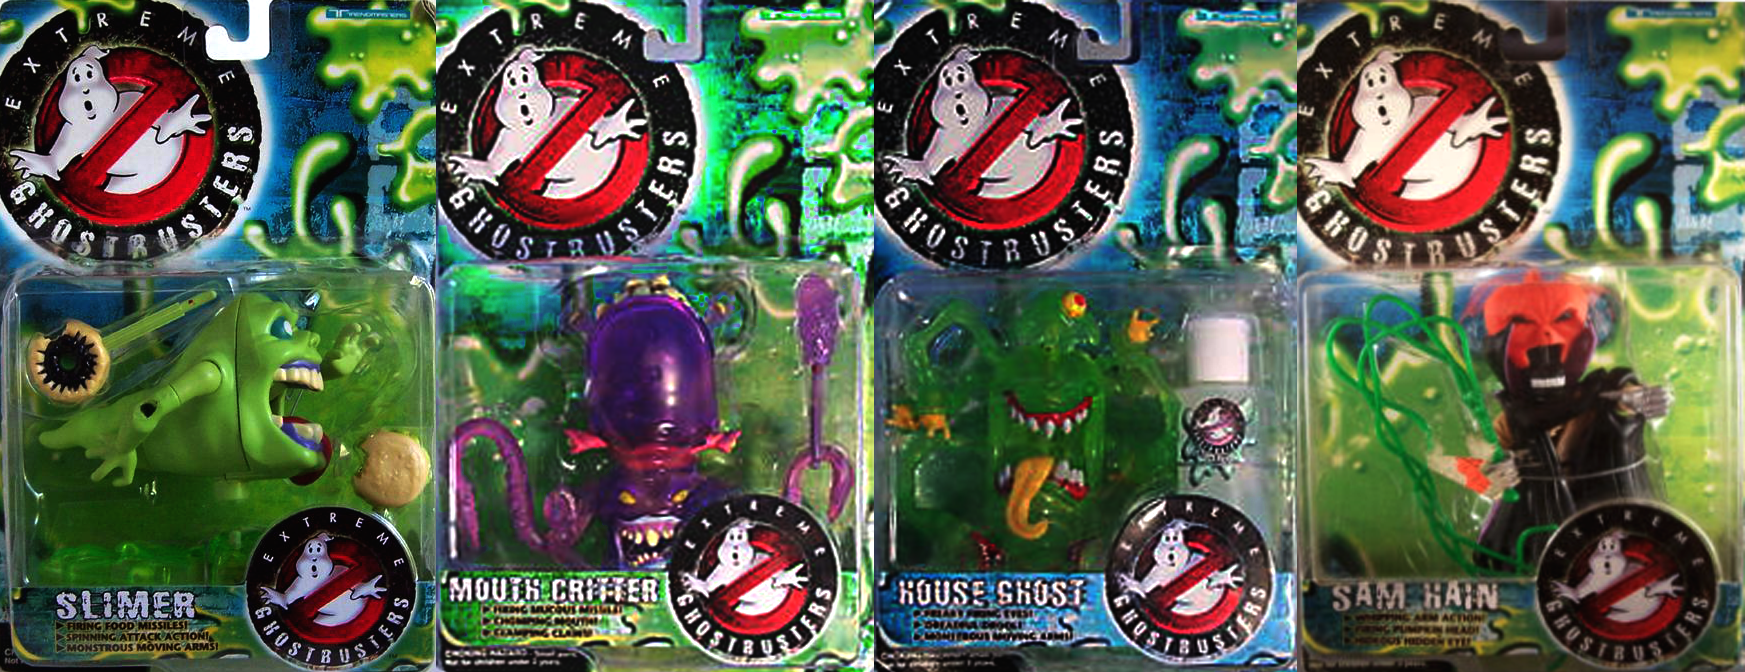 extreme ghostbusters ghosts